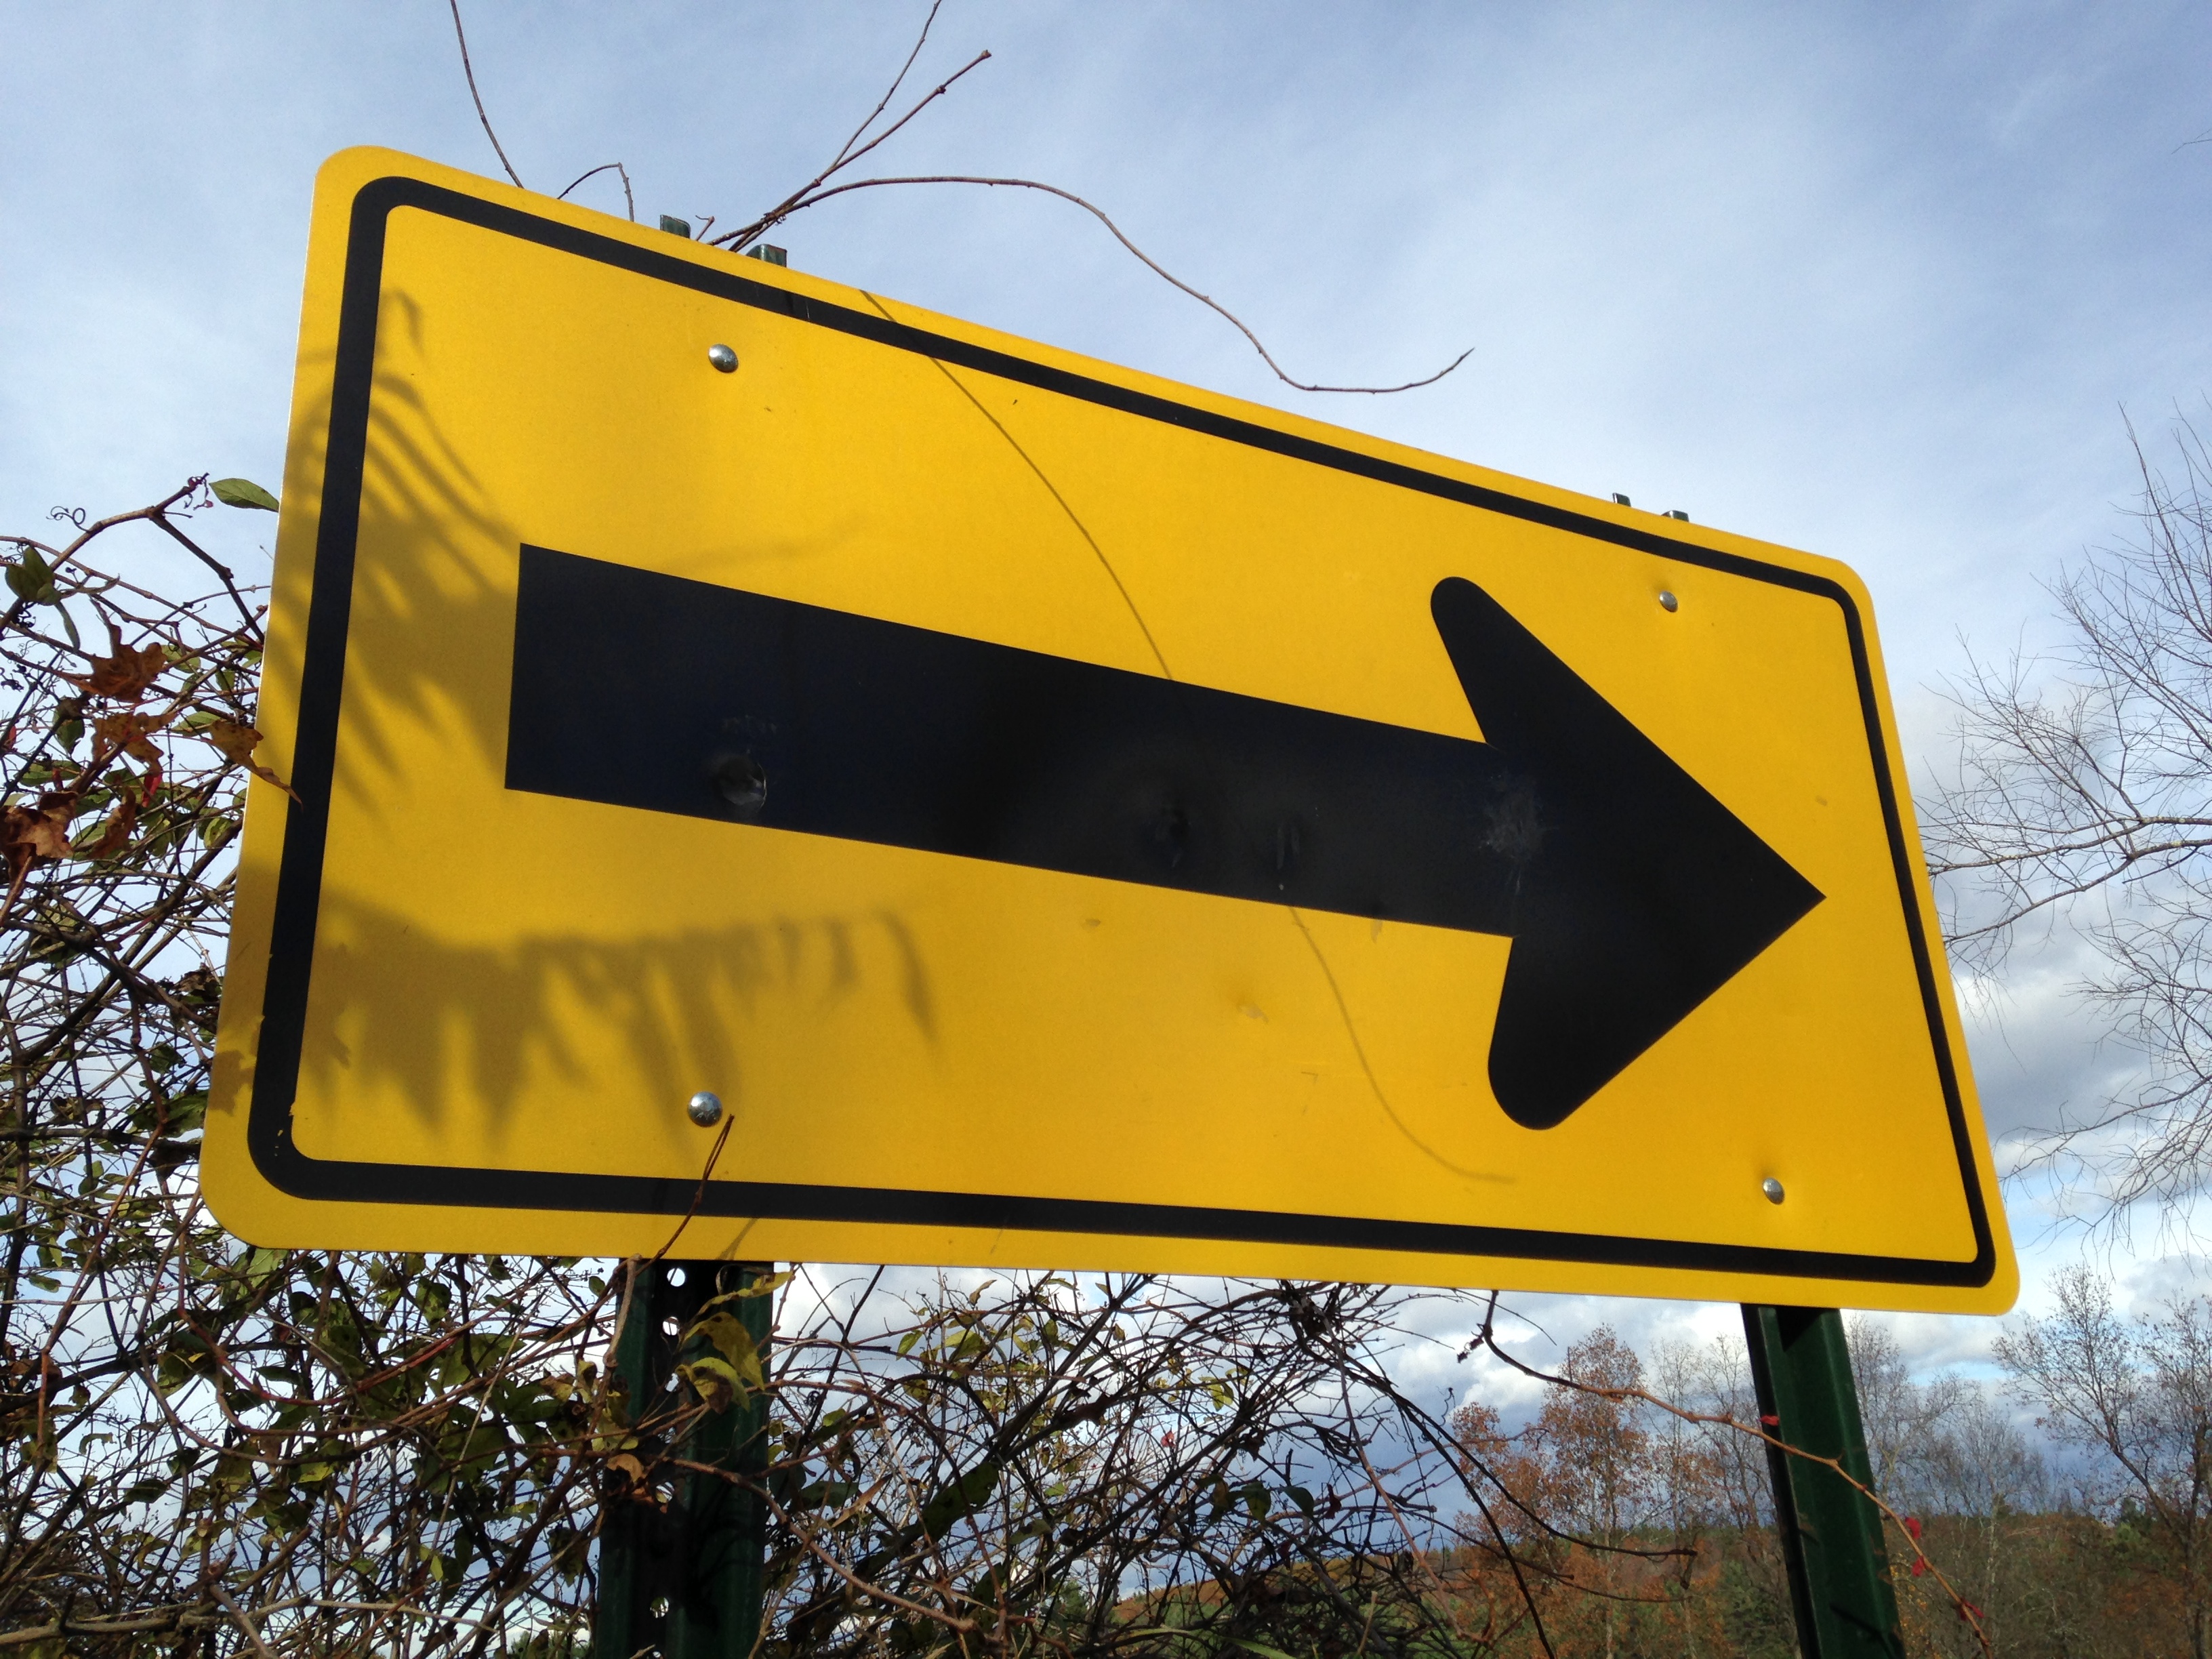 File:Right This Way.JPG - Wikimedia Commons